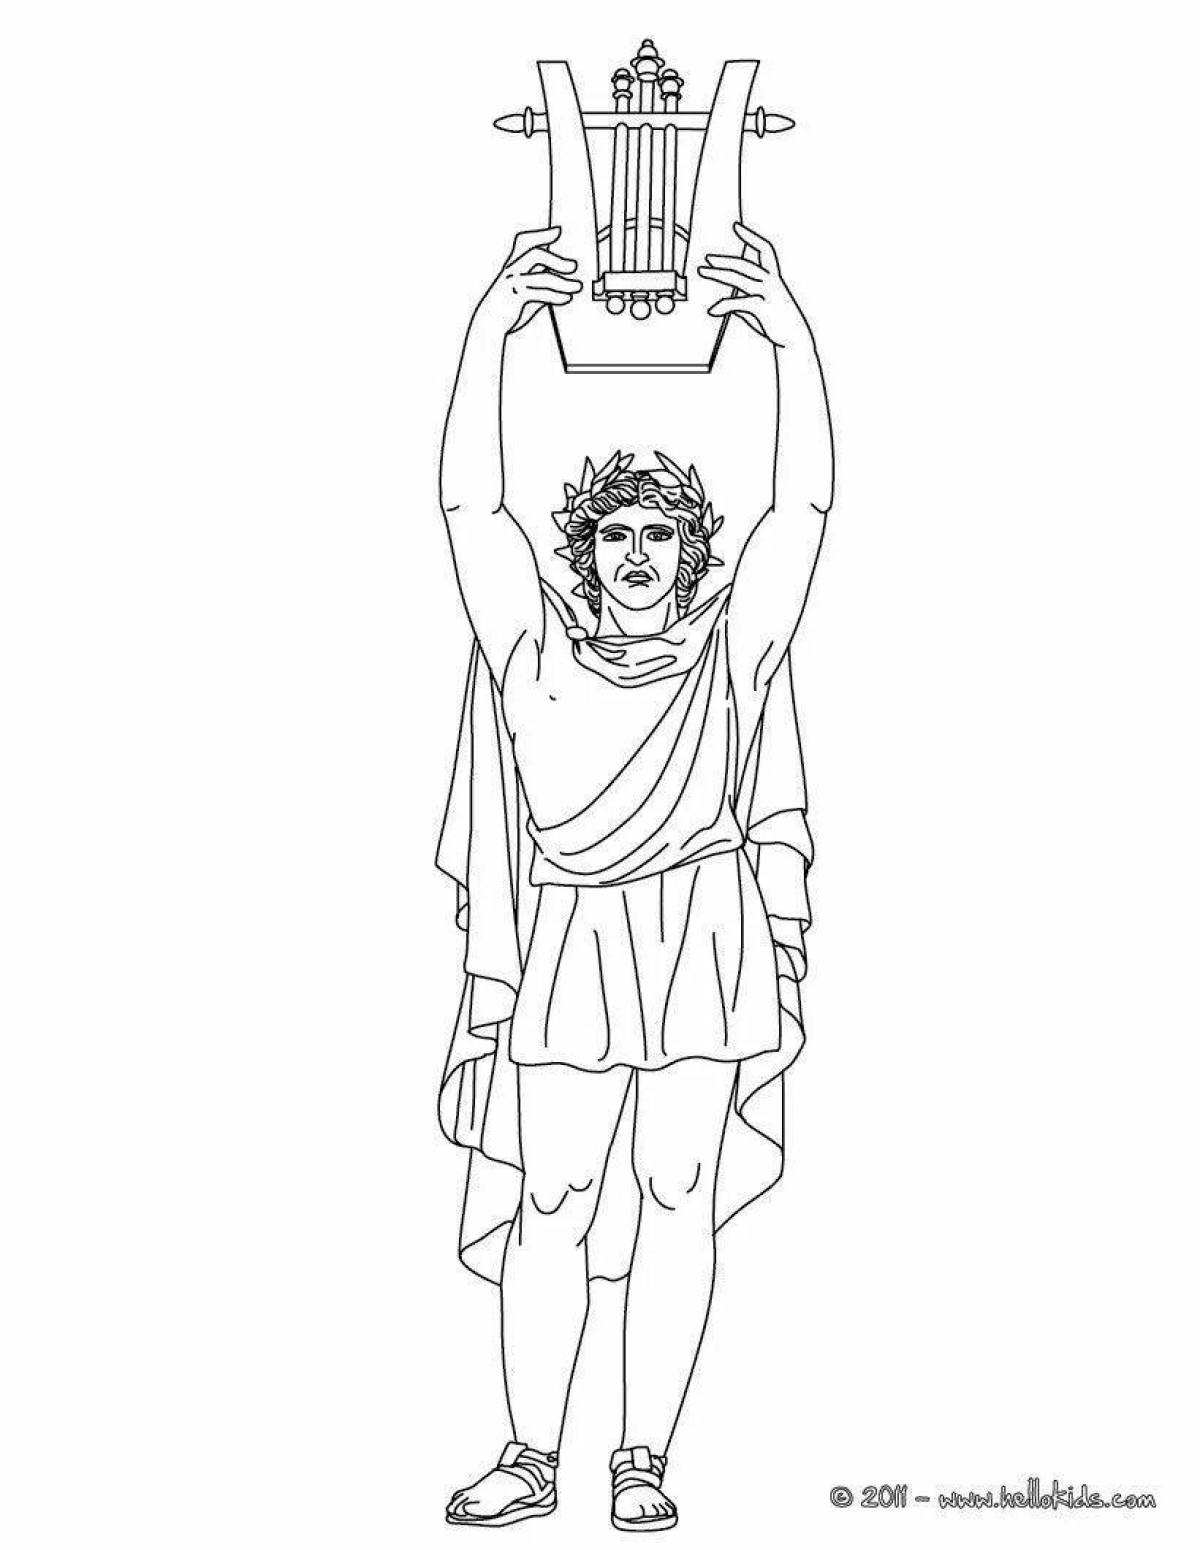 Adorable ancient greece coloring book for kids